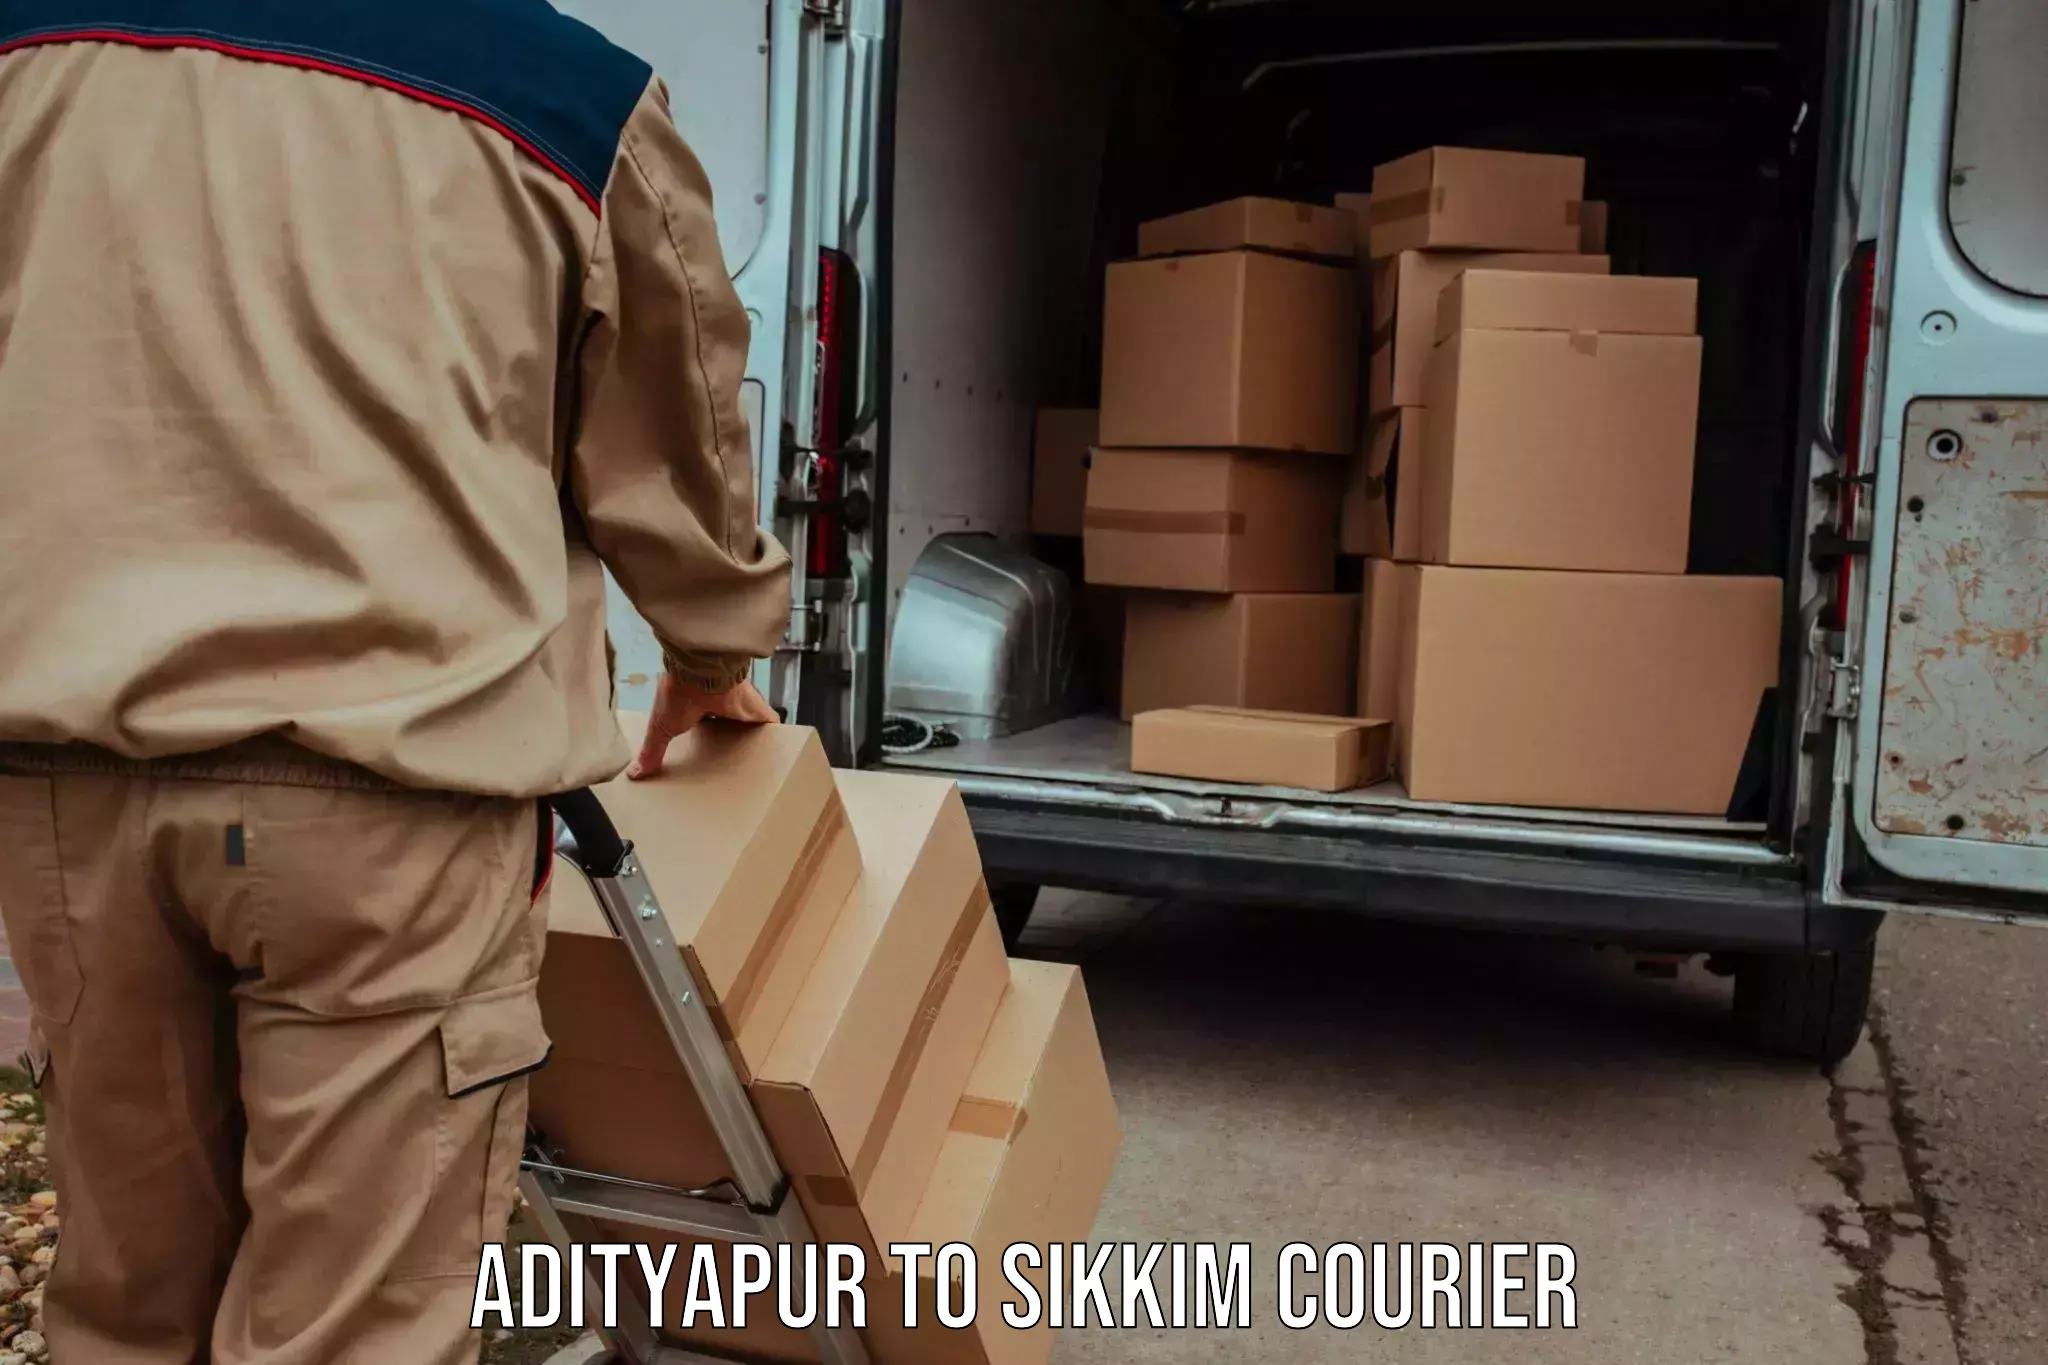 Next-day freight services Adityapur to West Sikkim